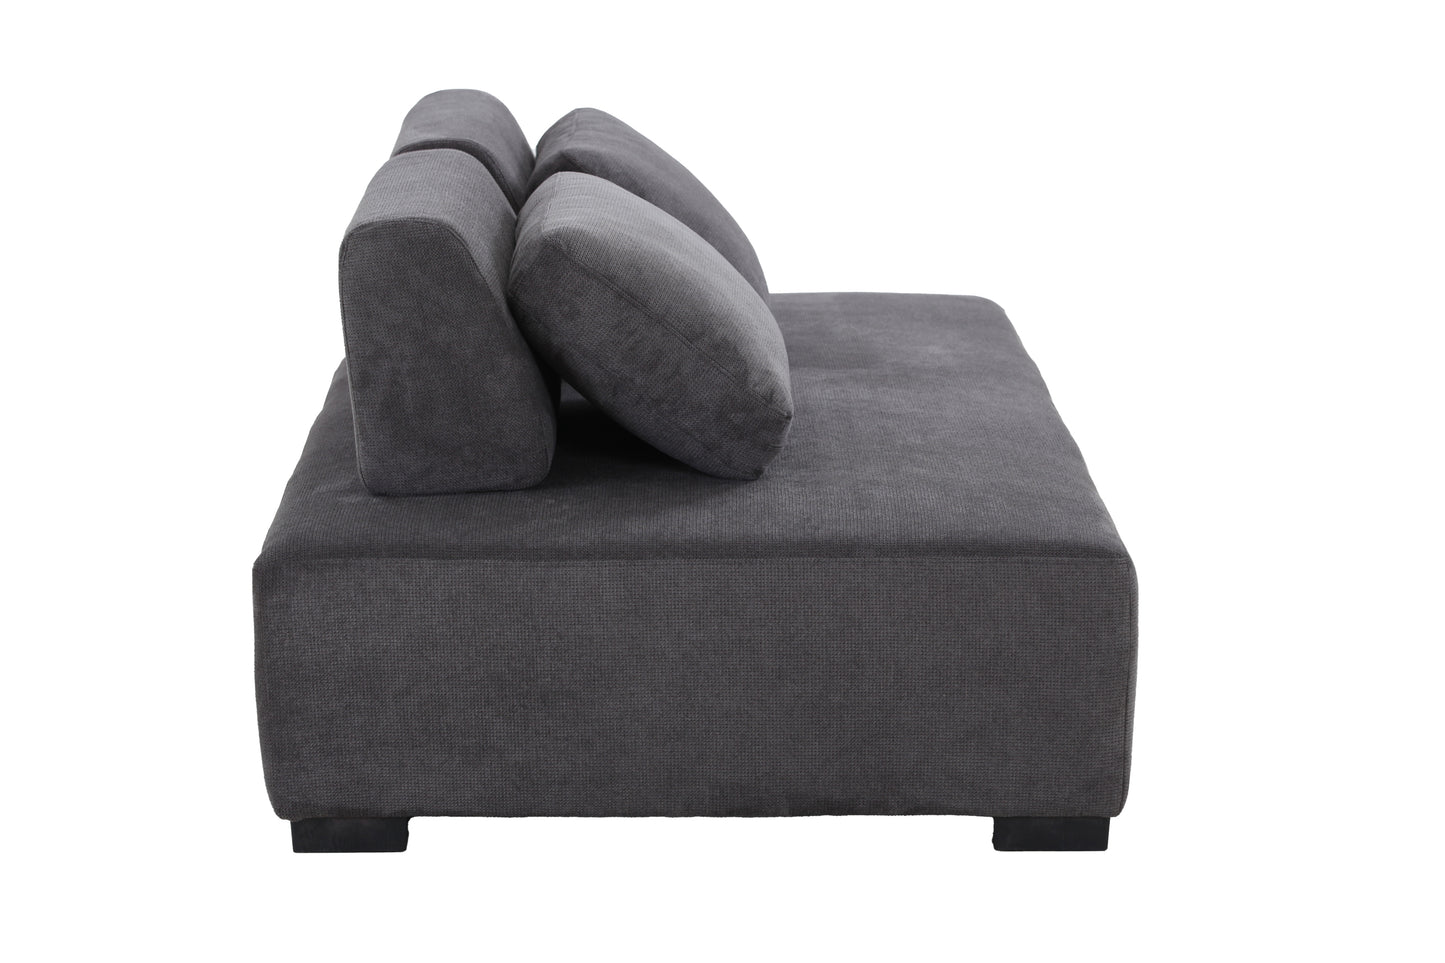 85.4'' Minimalist Sofa 3-Seater Couch for Apartment, Business Lounge, Waiting Area, Hotel Lobby - Grey